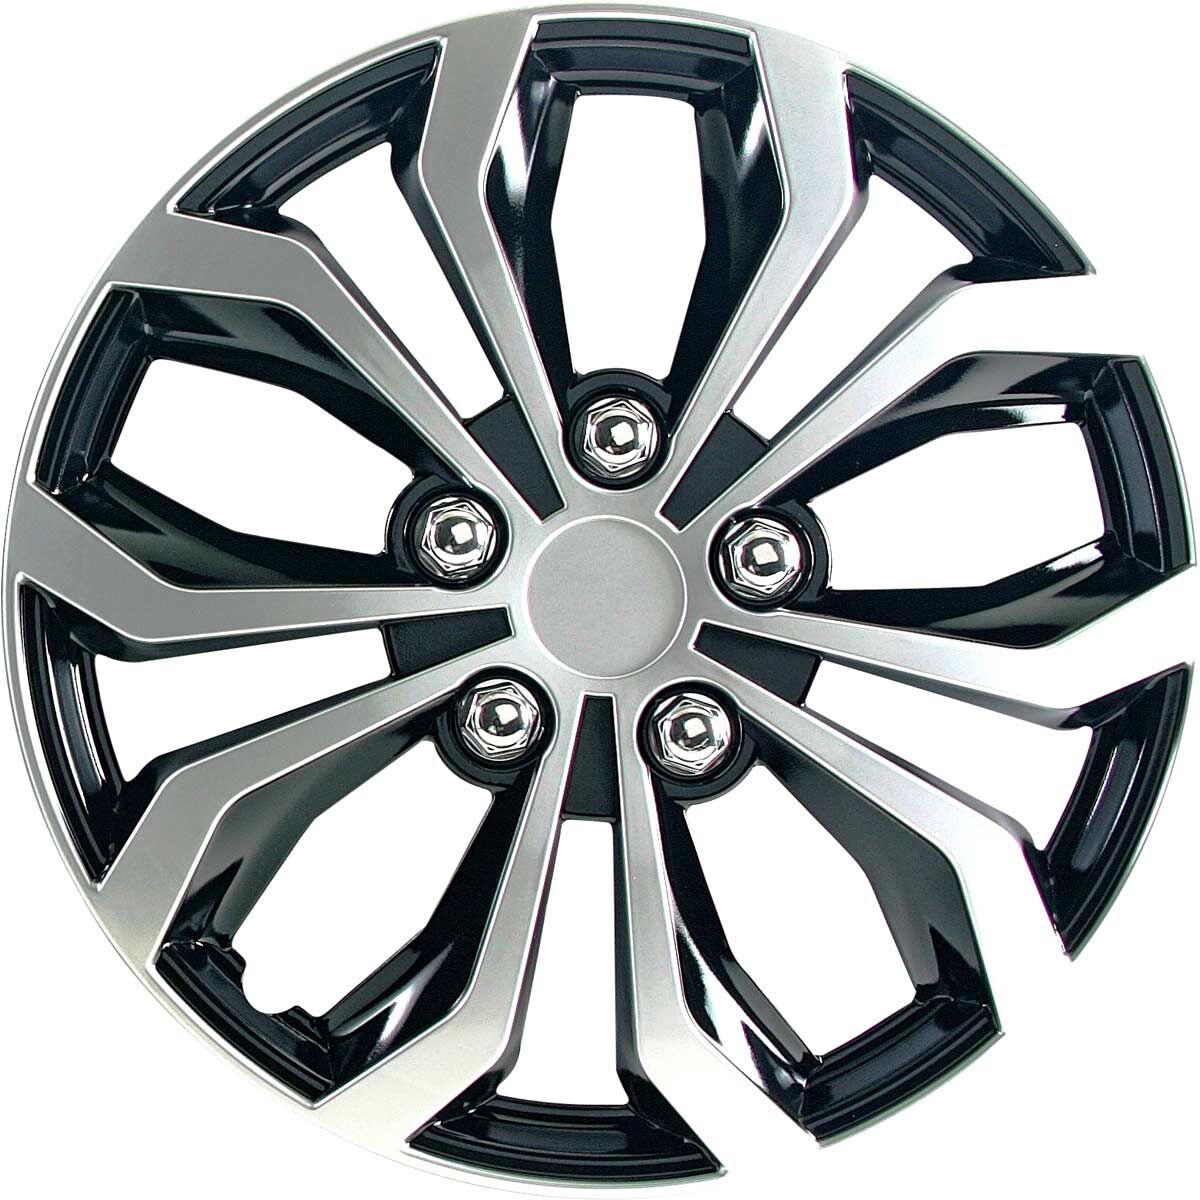 15 inch wheel covers kmart